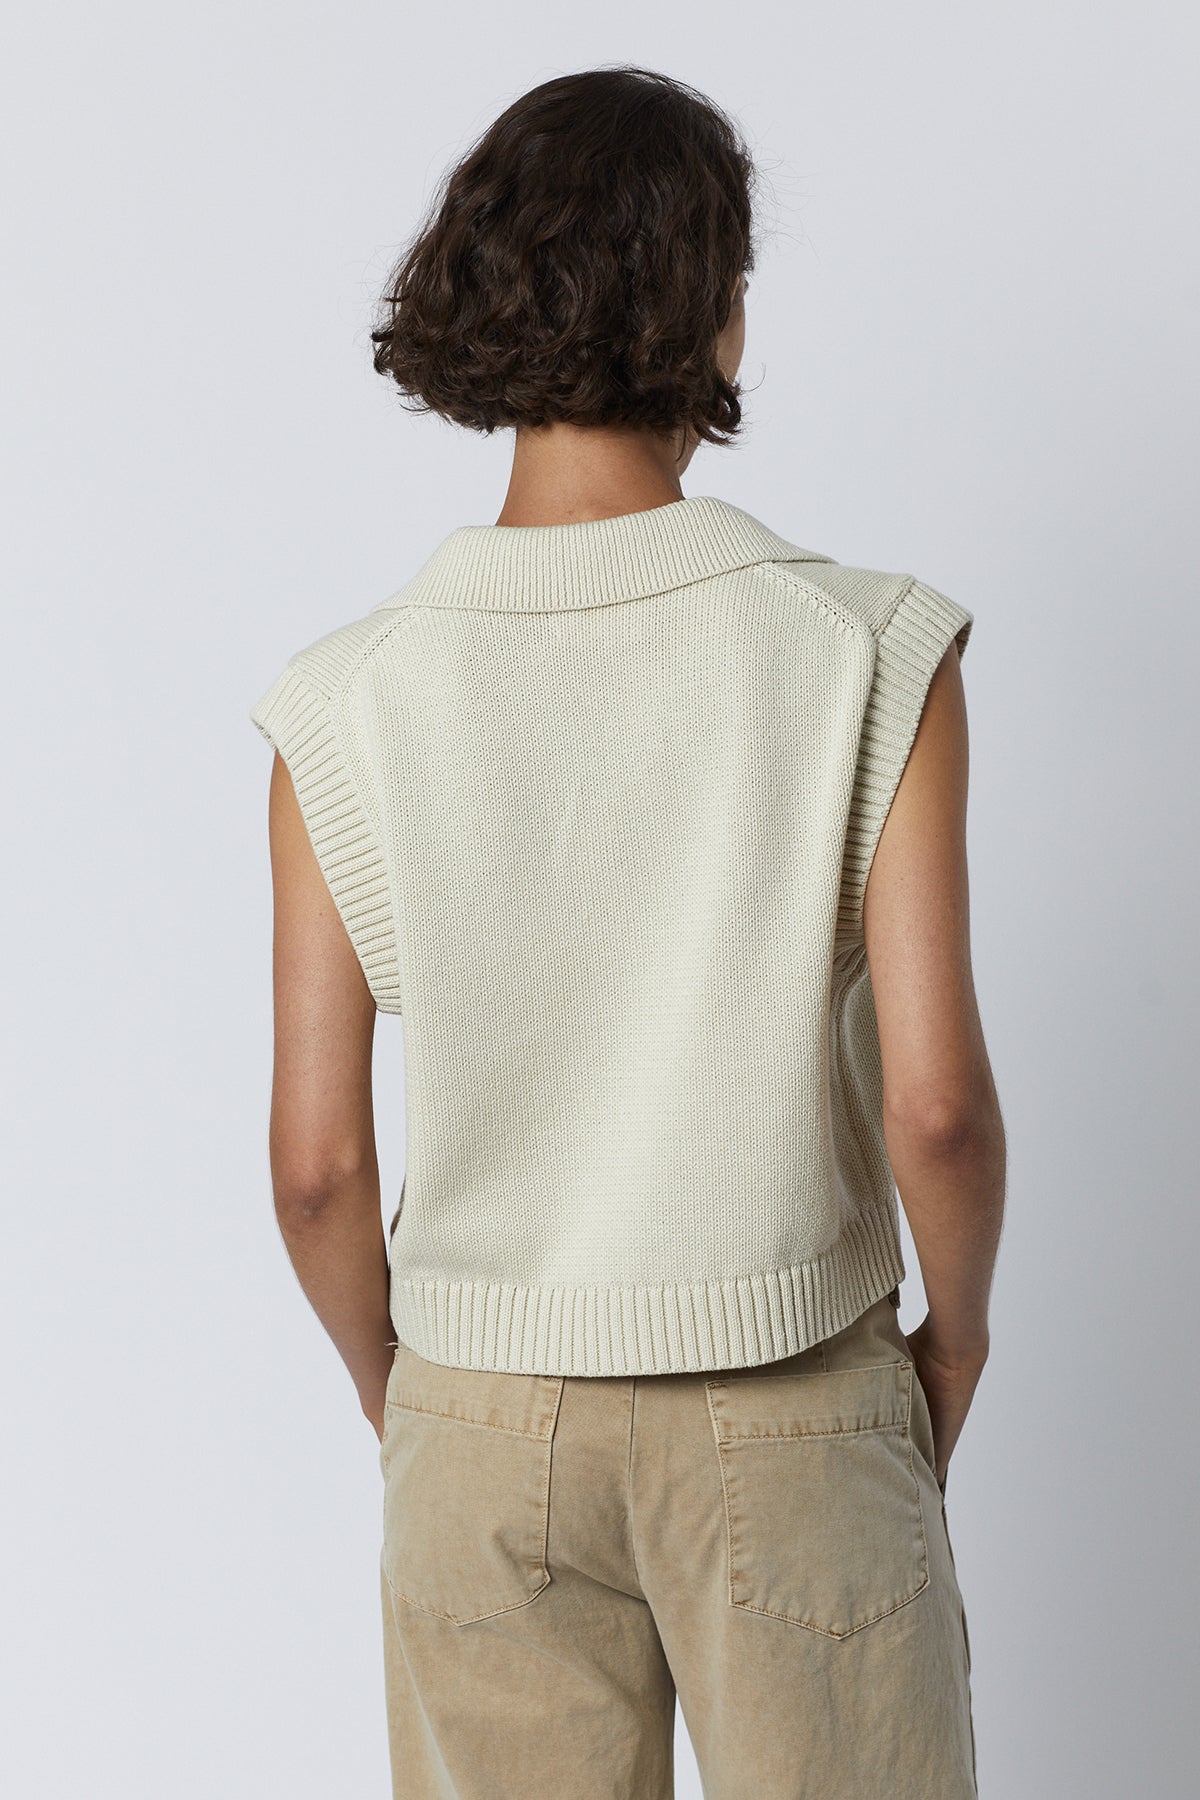   Avalon Sweater Tank in flax with Temescal pant back 